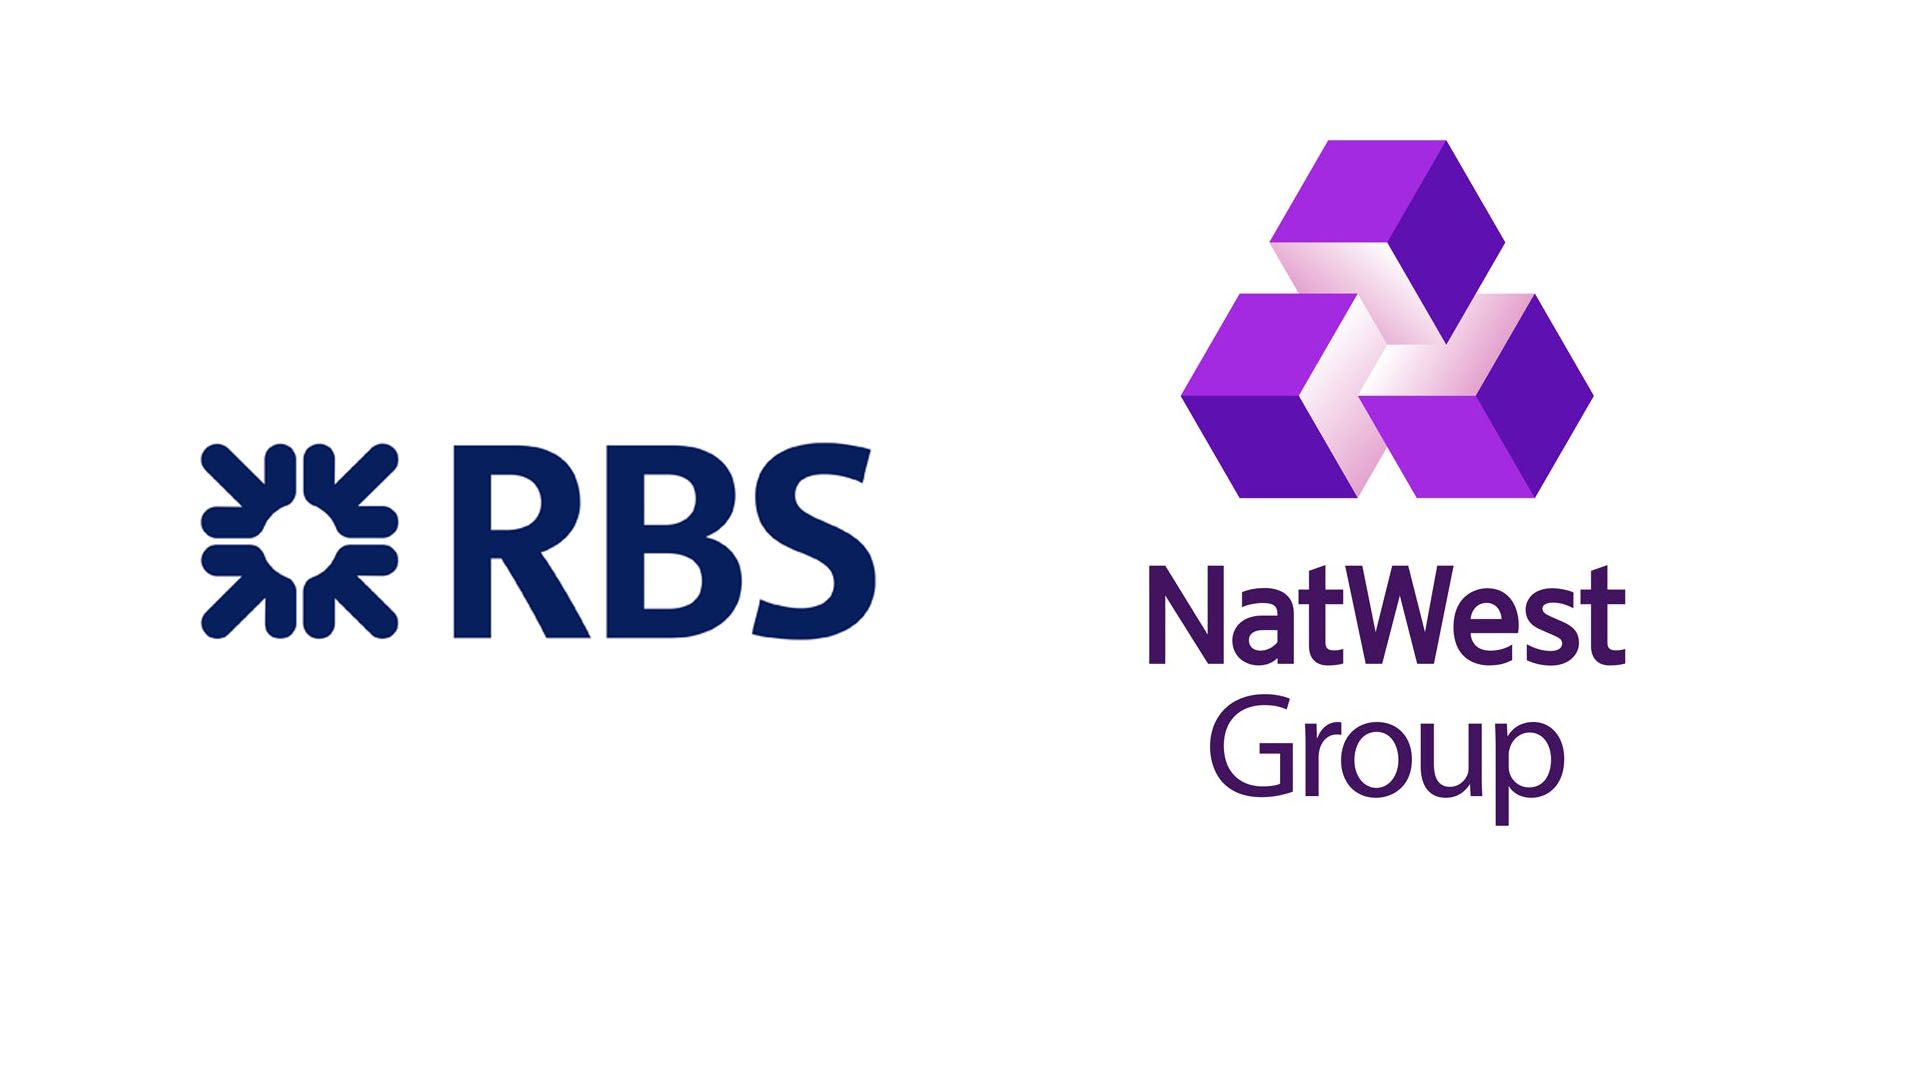 The old and new logos for RBS/NatWest Group